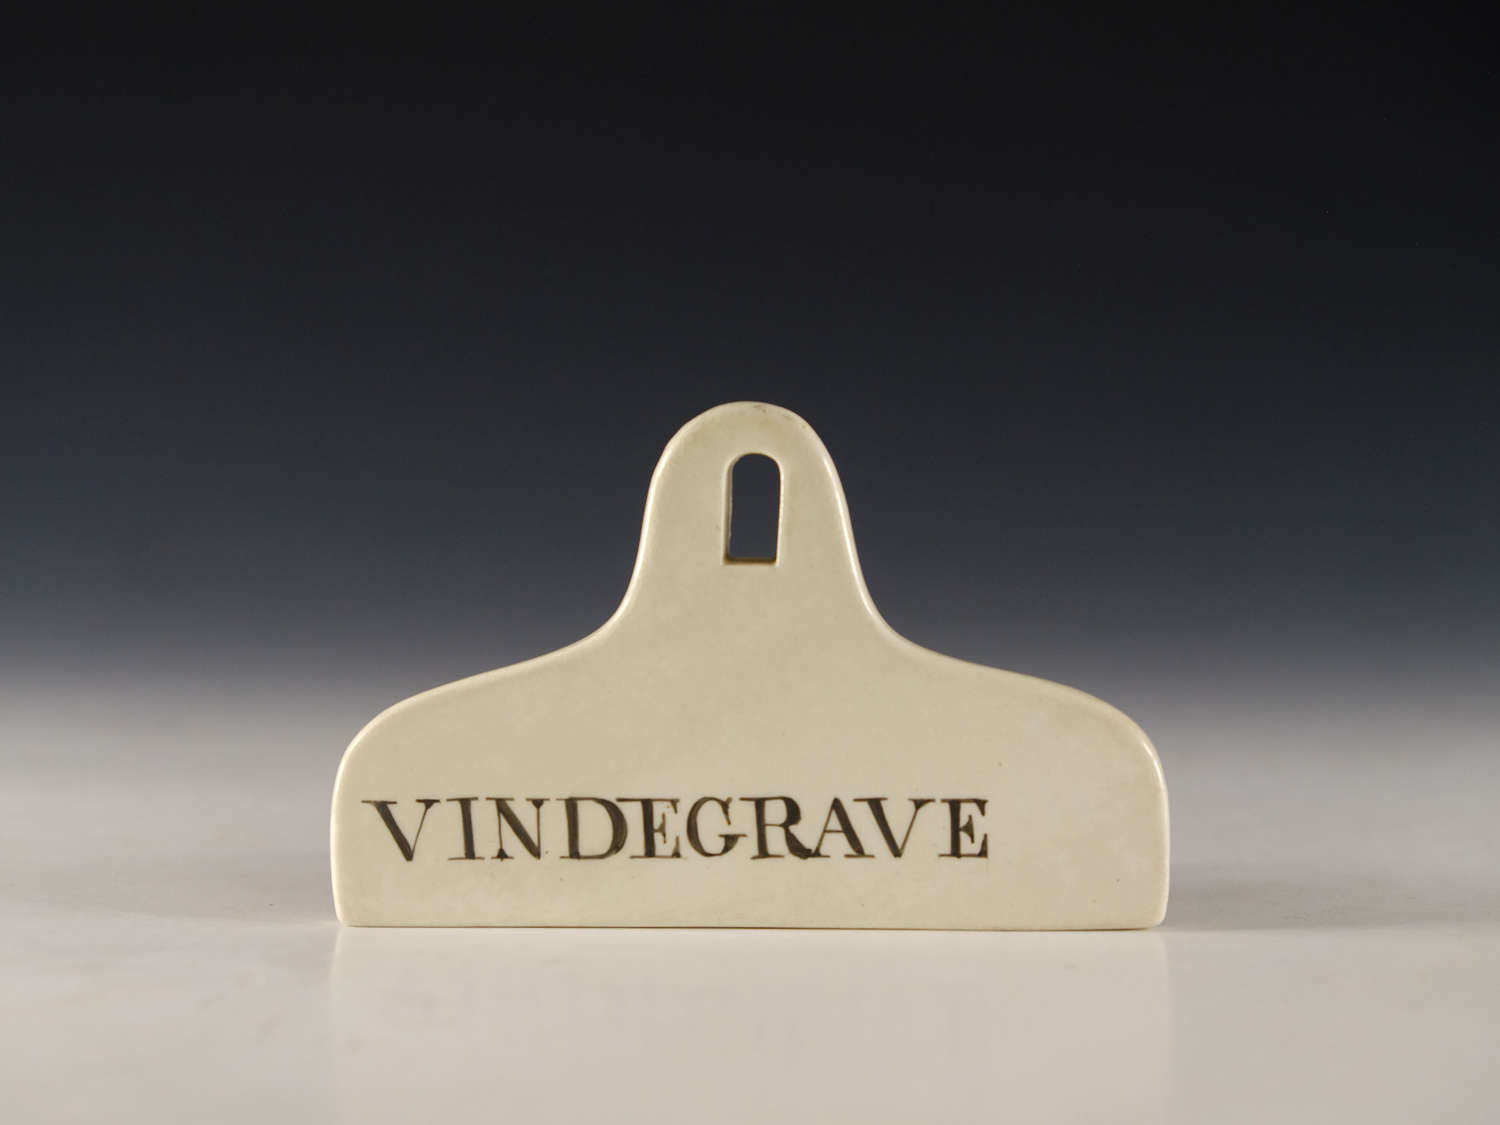 Bin label Vindegrave English Early to Mid 19th century